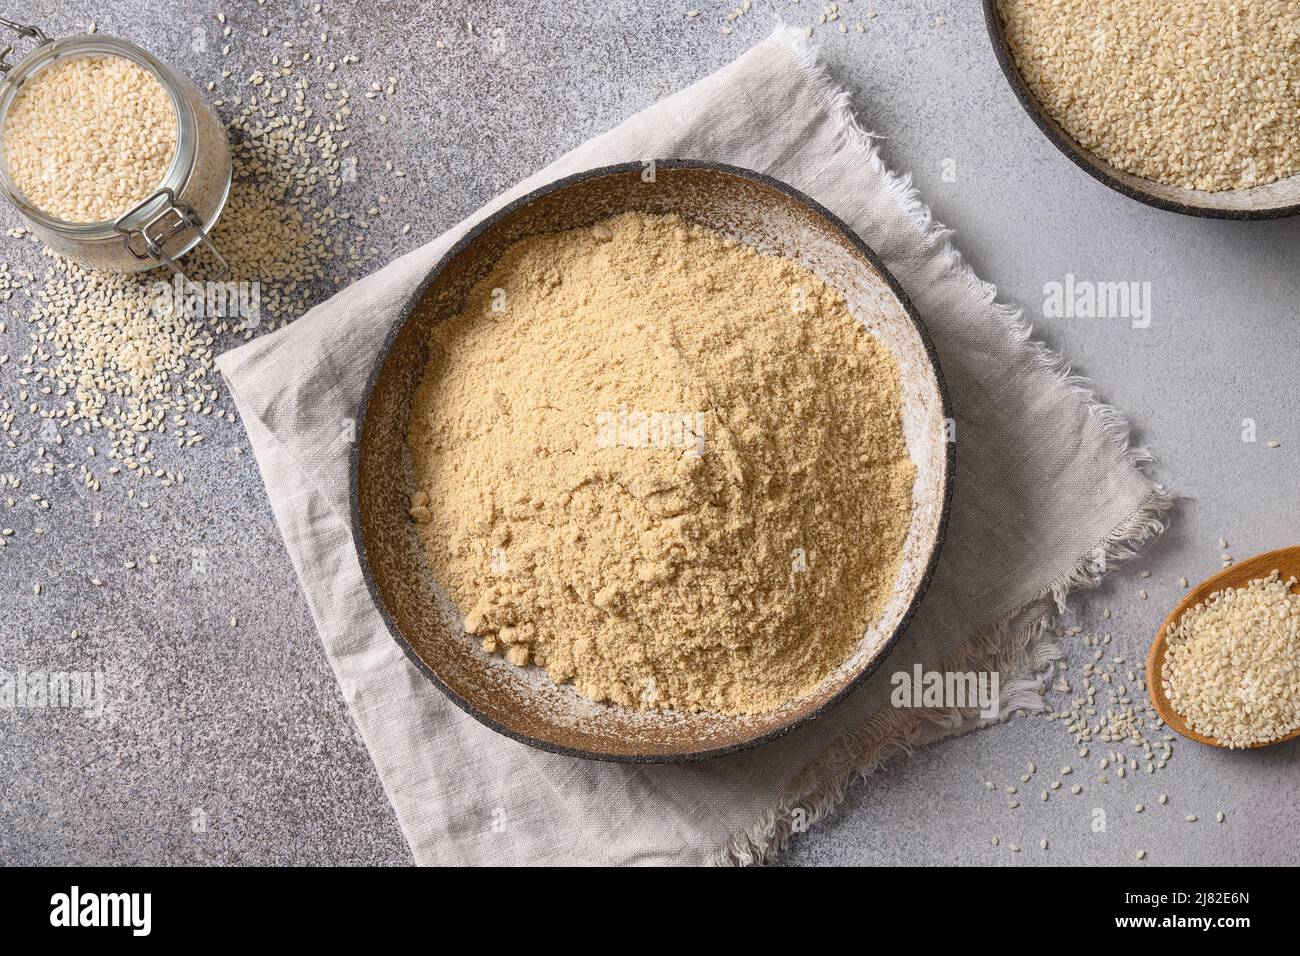 Sesame flour in bowl and white sesame seeds on gray background for cooking low carbohydrate dessert. Top view. Stock Photo